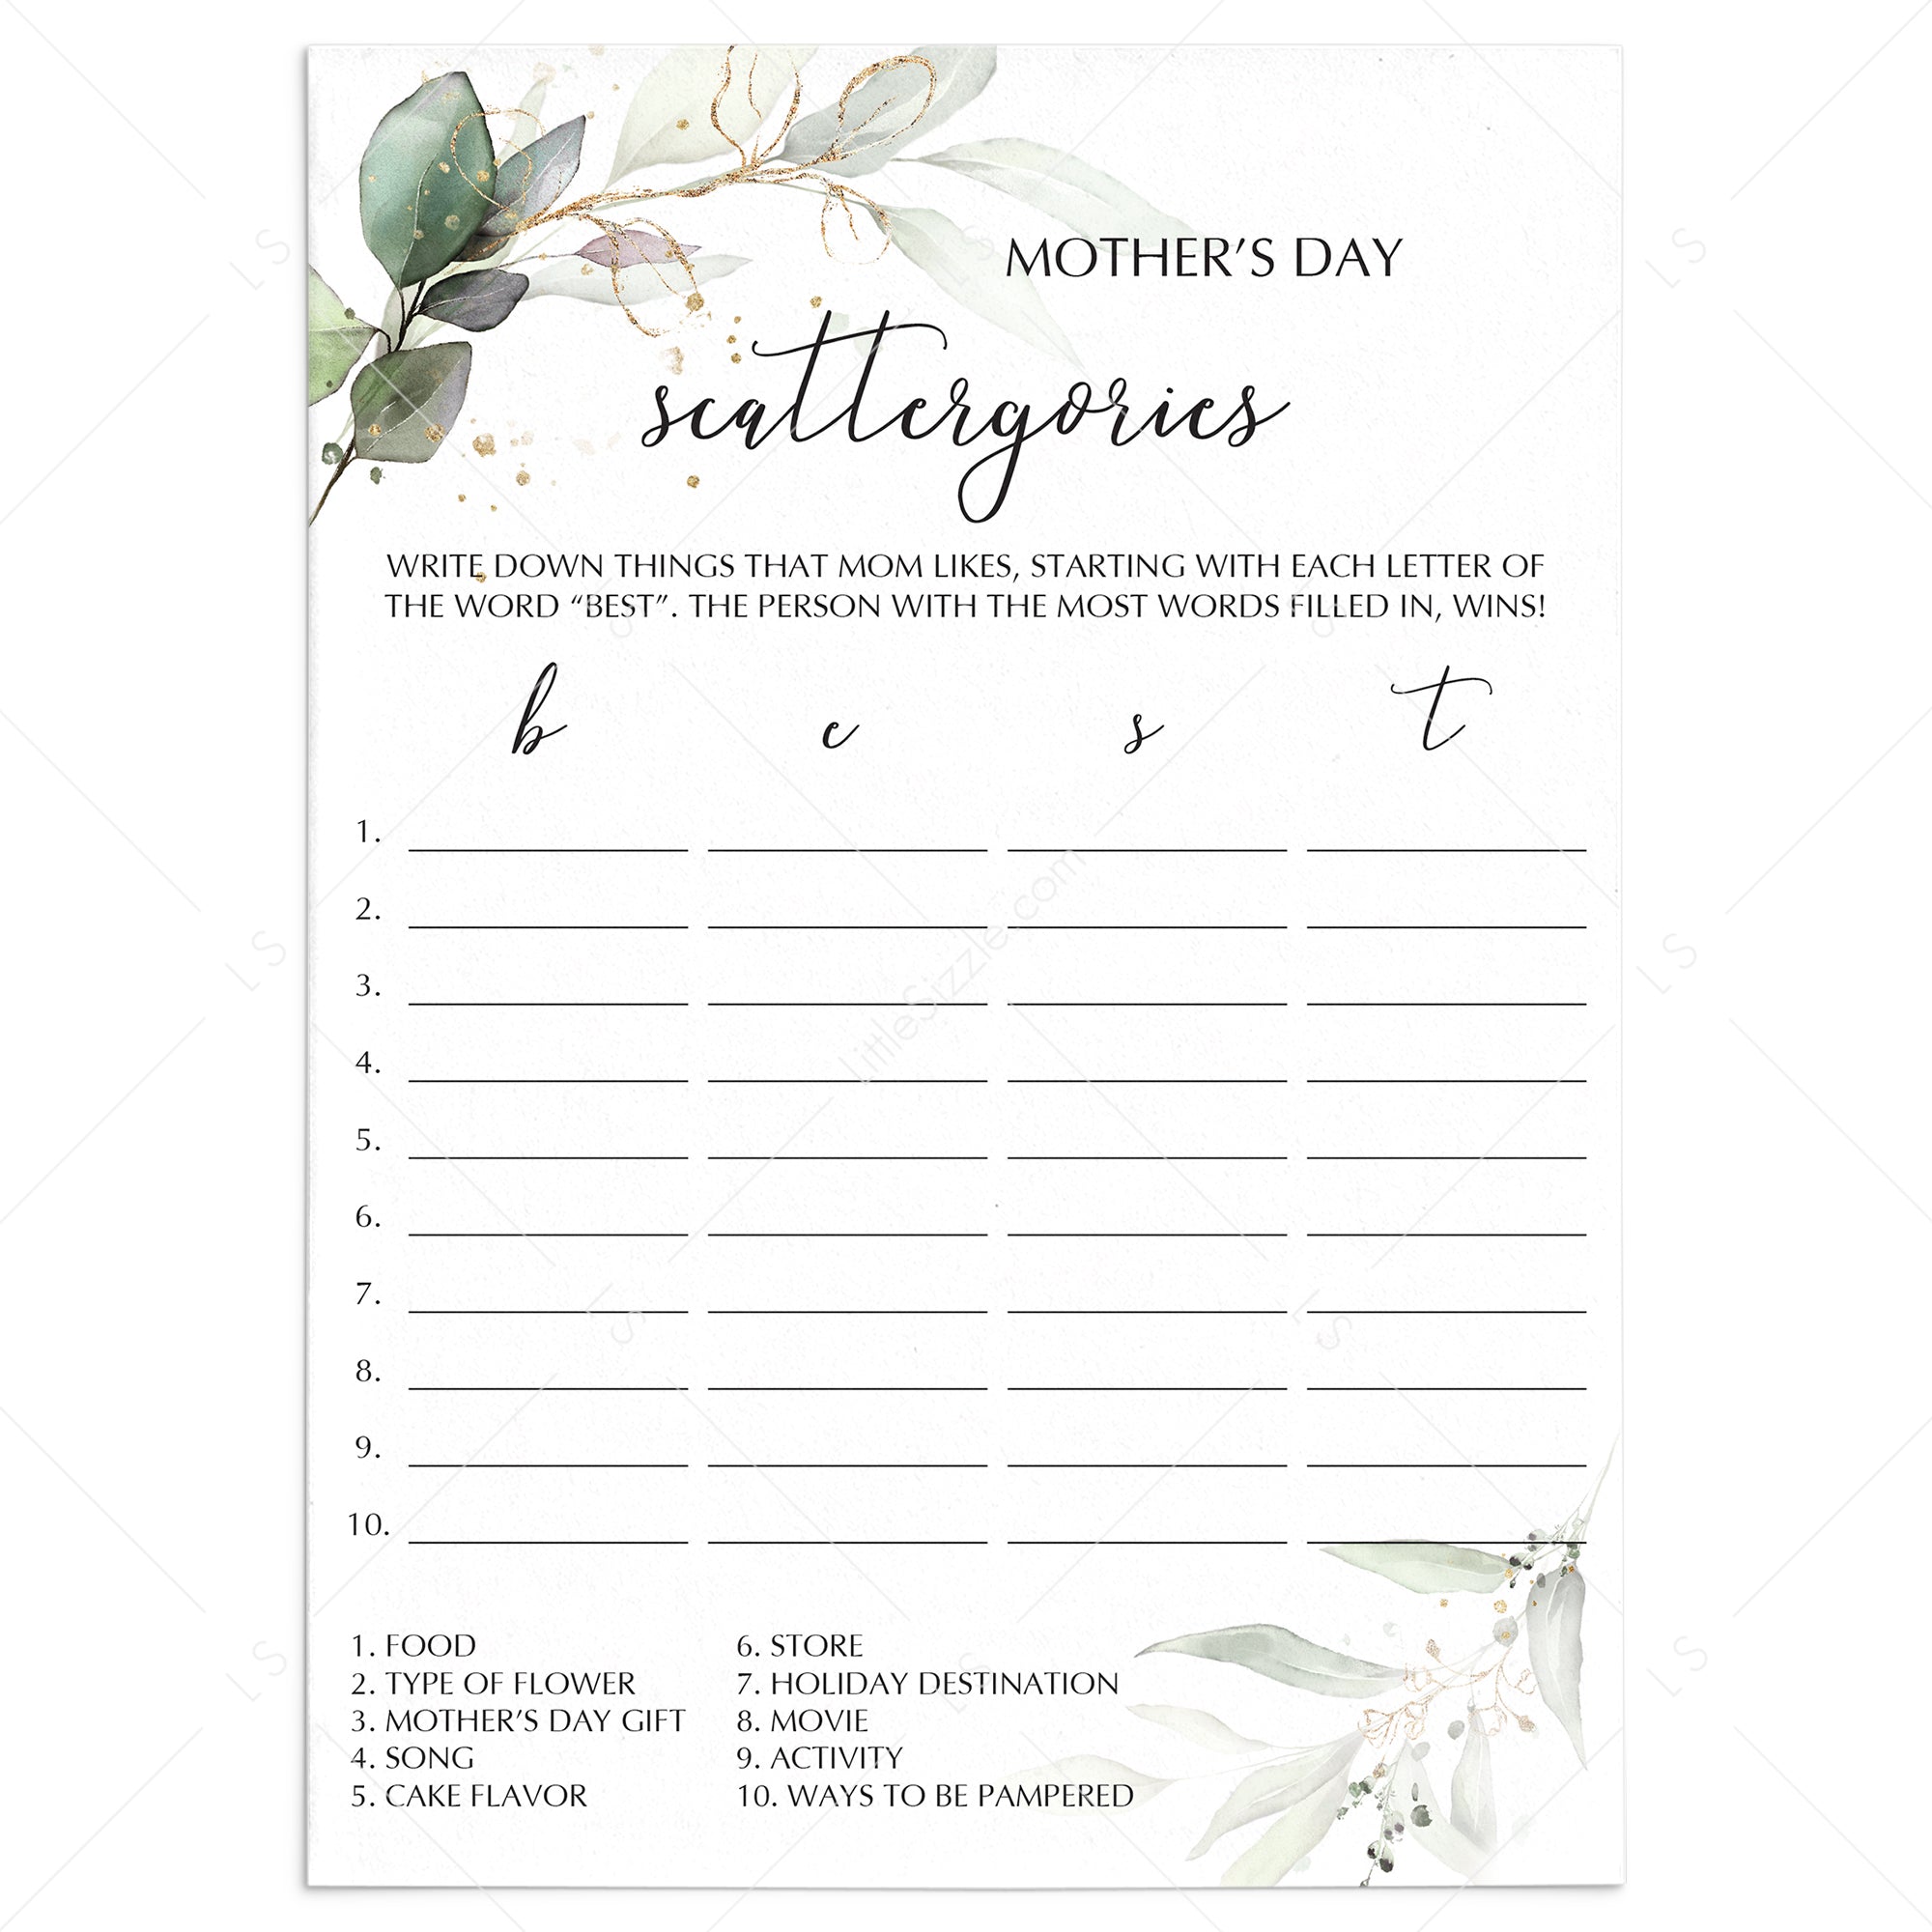 Printable Mothers Day Game Scattergories by LittleSizzle